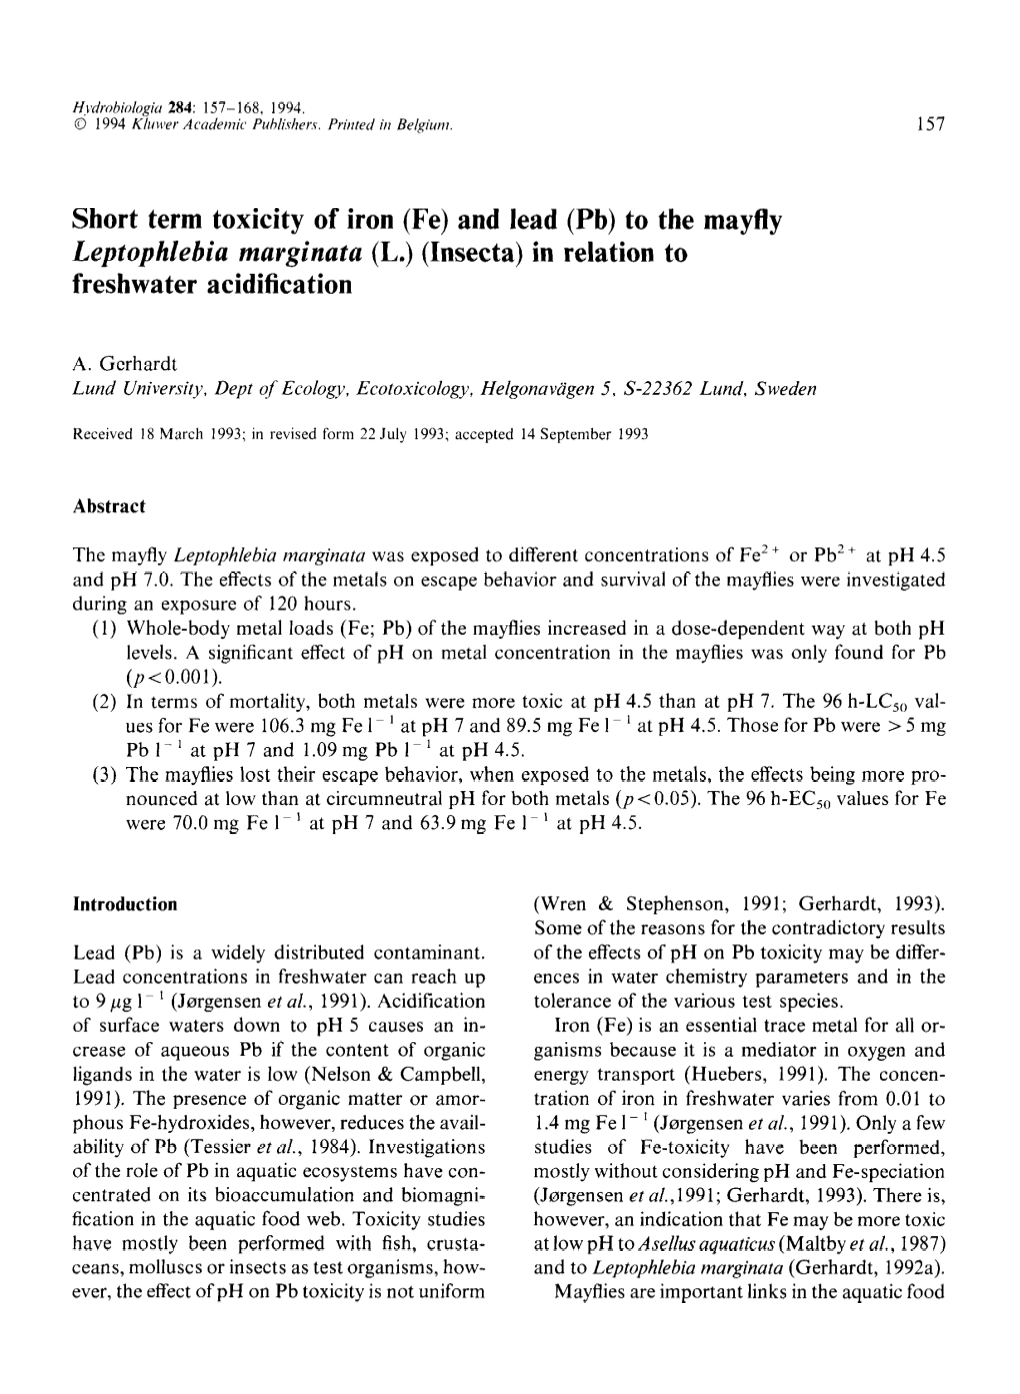 Short Term Toxicity of Iron (Fe) and Lead (Pb) to the Mayfly Leptophlebiu Marginata (L.) (Insecta) in Relation to Freshwater Acidification